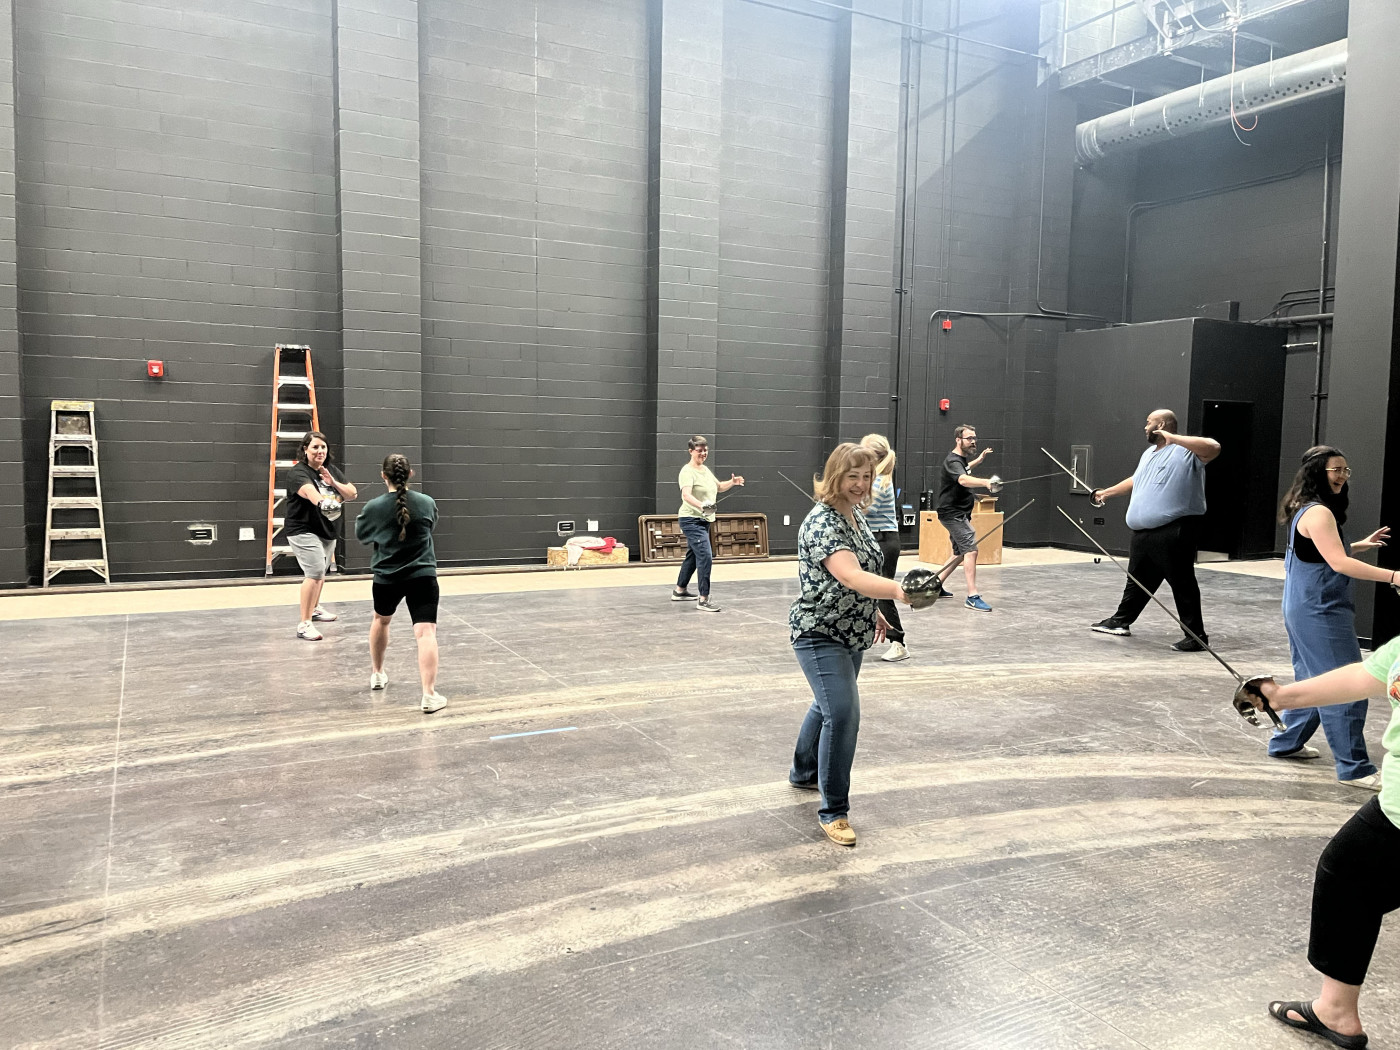 Several high school teachers learn stage combat on stage.